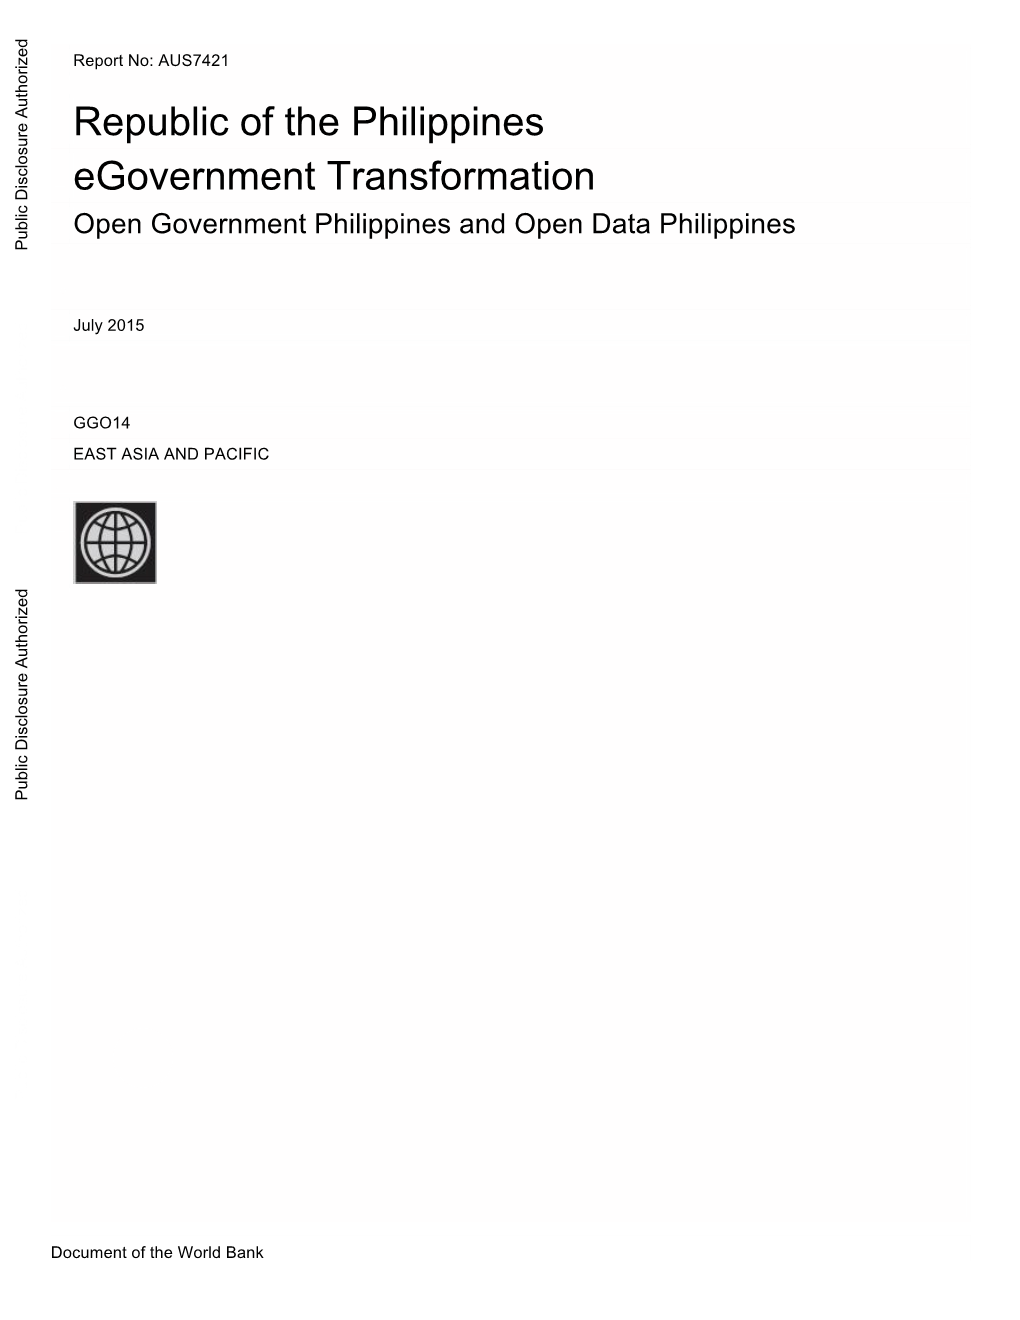 Open Government Philippines and Open Data Philippines Public Disclosure Authorized